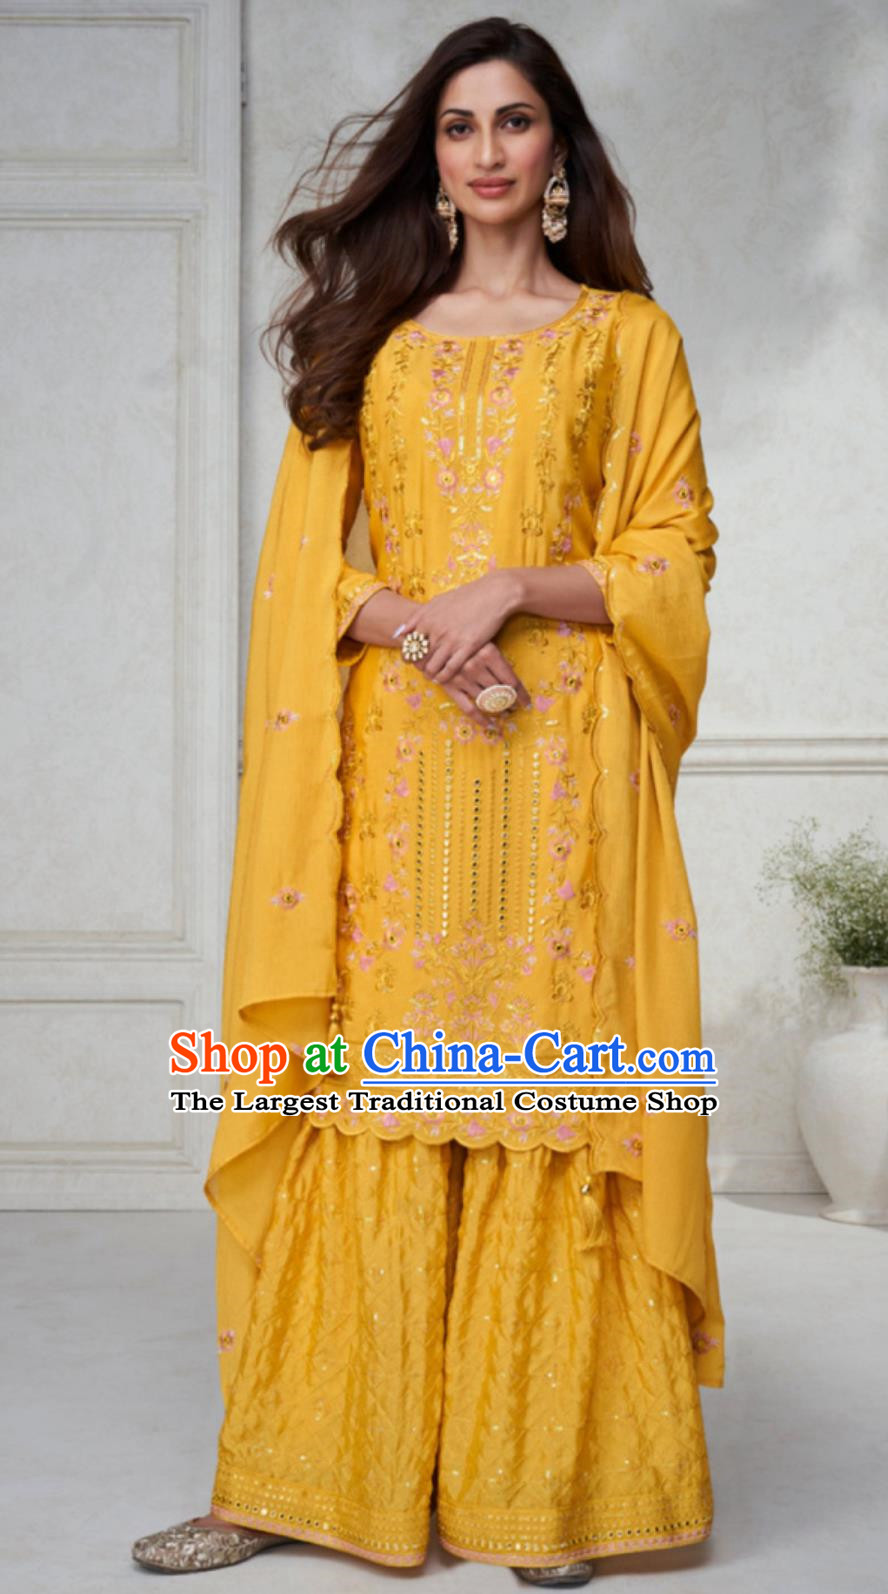 Traditional India Woman Costume Indian National Clothing Mustard Punjabi Outfit